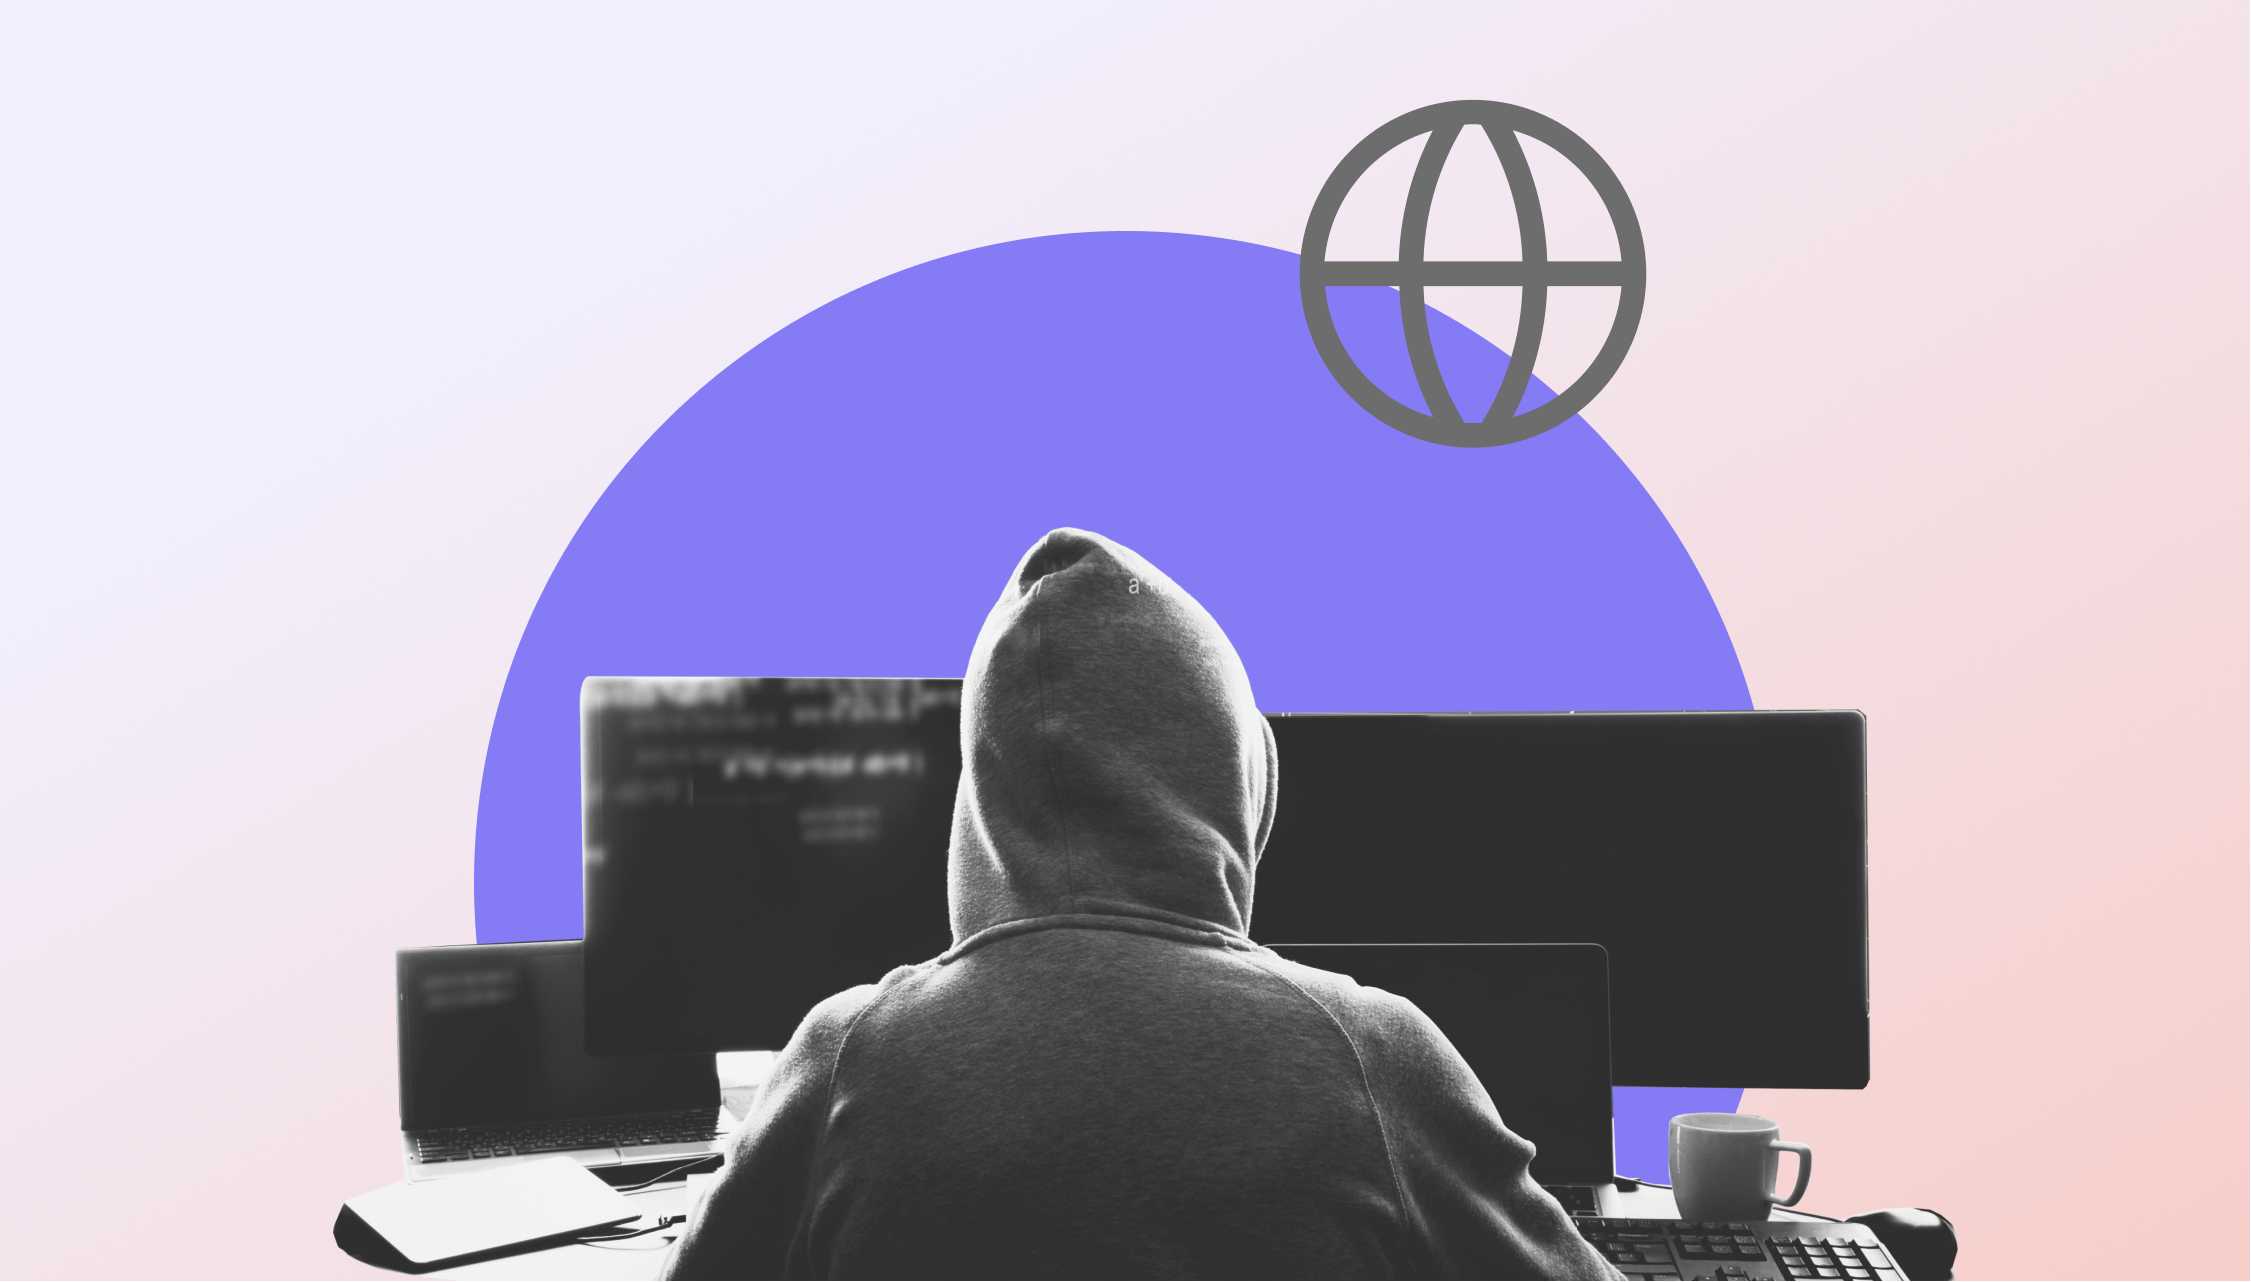 Man with hood during a SAD DNS attack in front of 3 screens. A purple circle and a world globelicon can still be seen in the background.